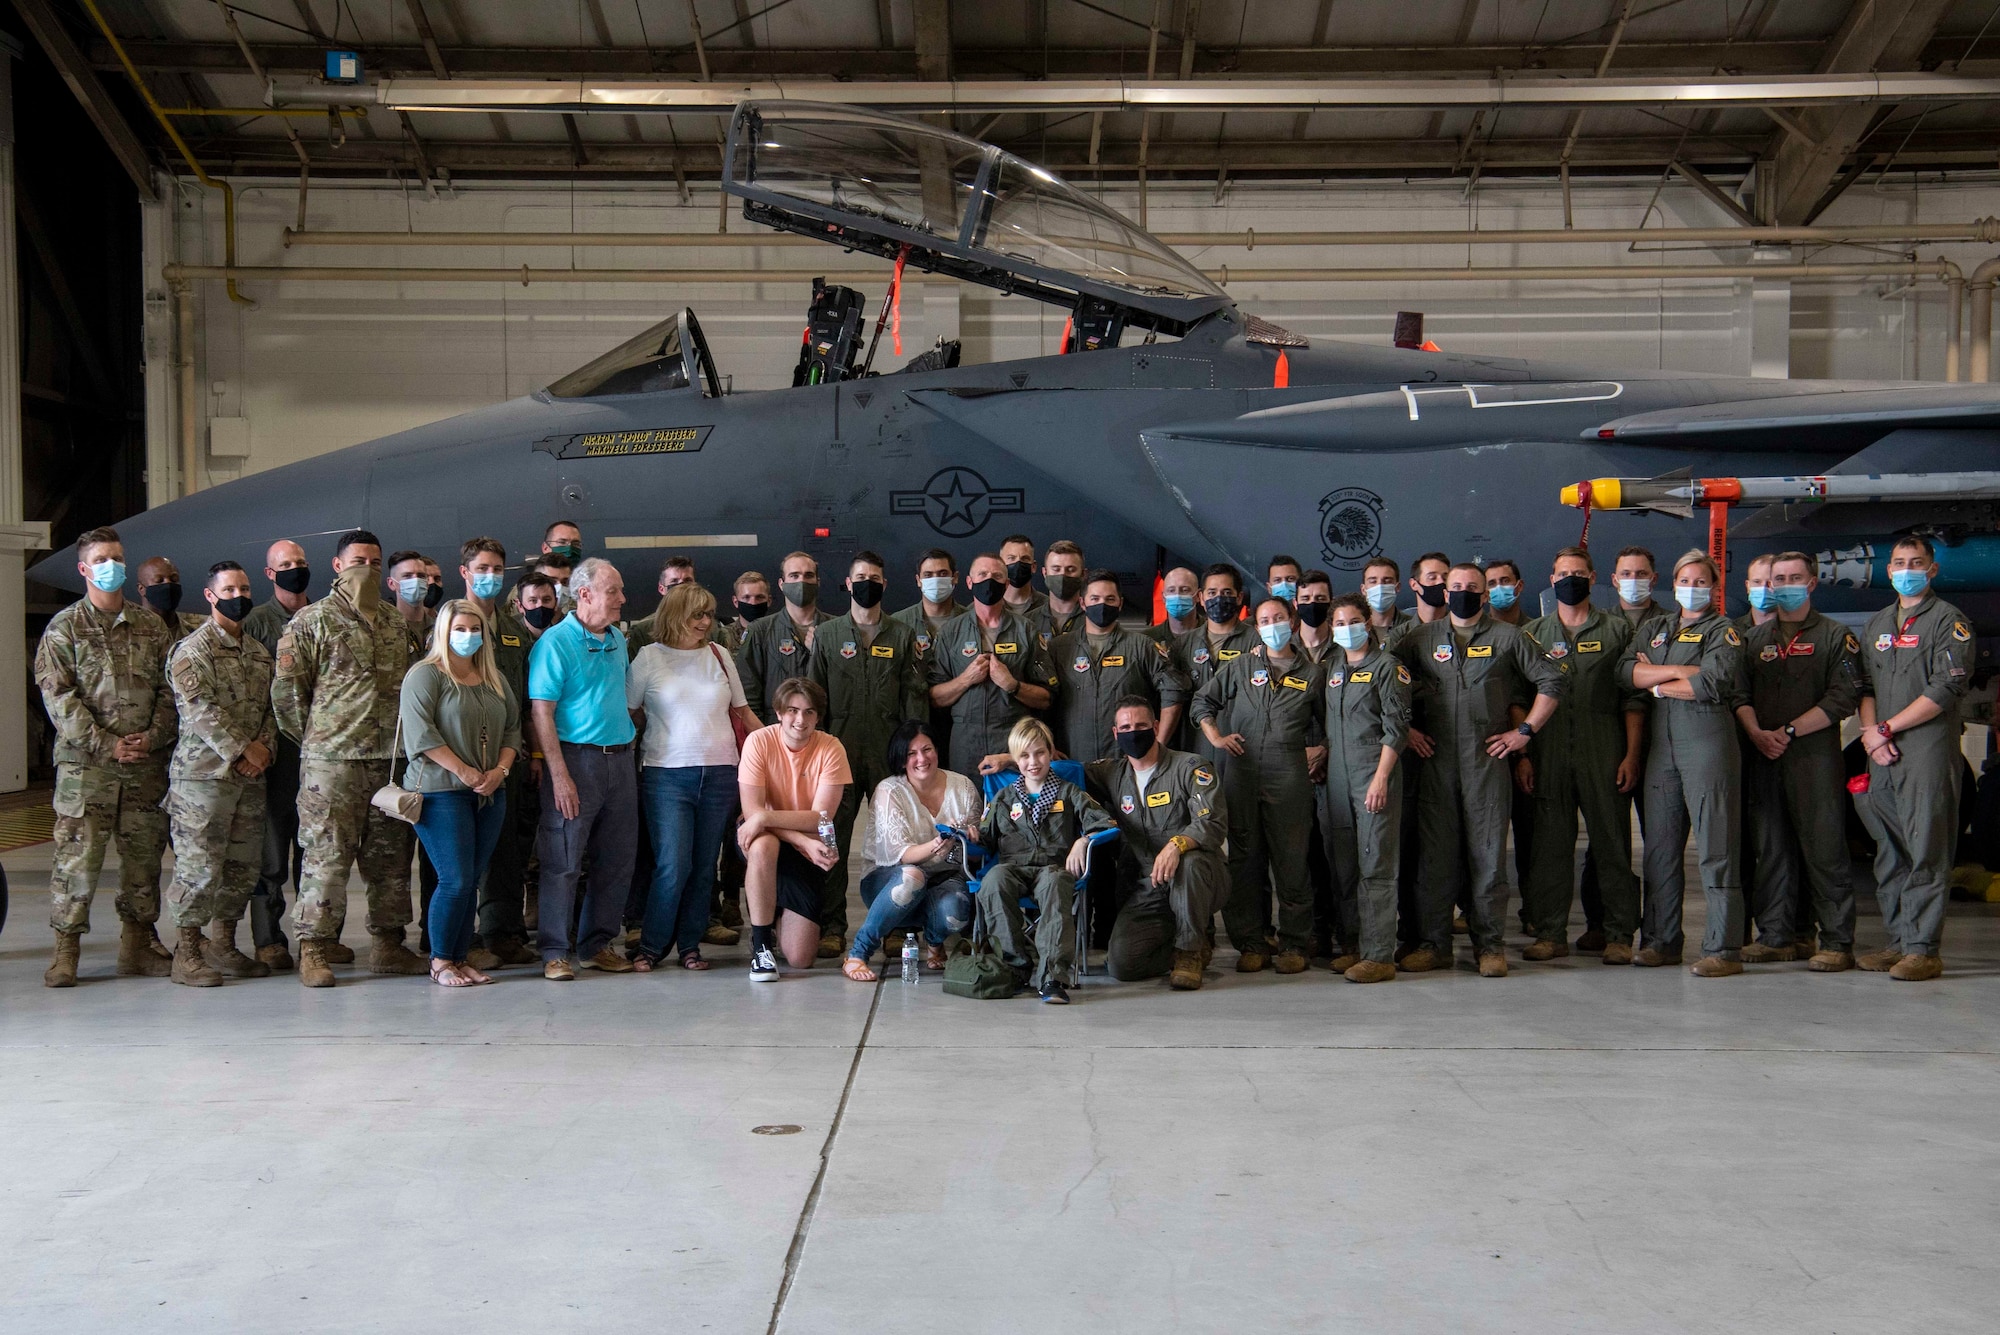 Pilot for a Day participants, Jackson Forrsberg and his family gather for a group photo during Pilot for a Day event at Seymour Johnson Air Force Base, North Carolina, June 17, 2021.